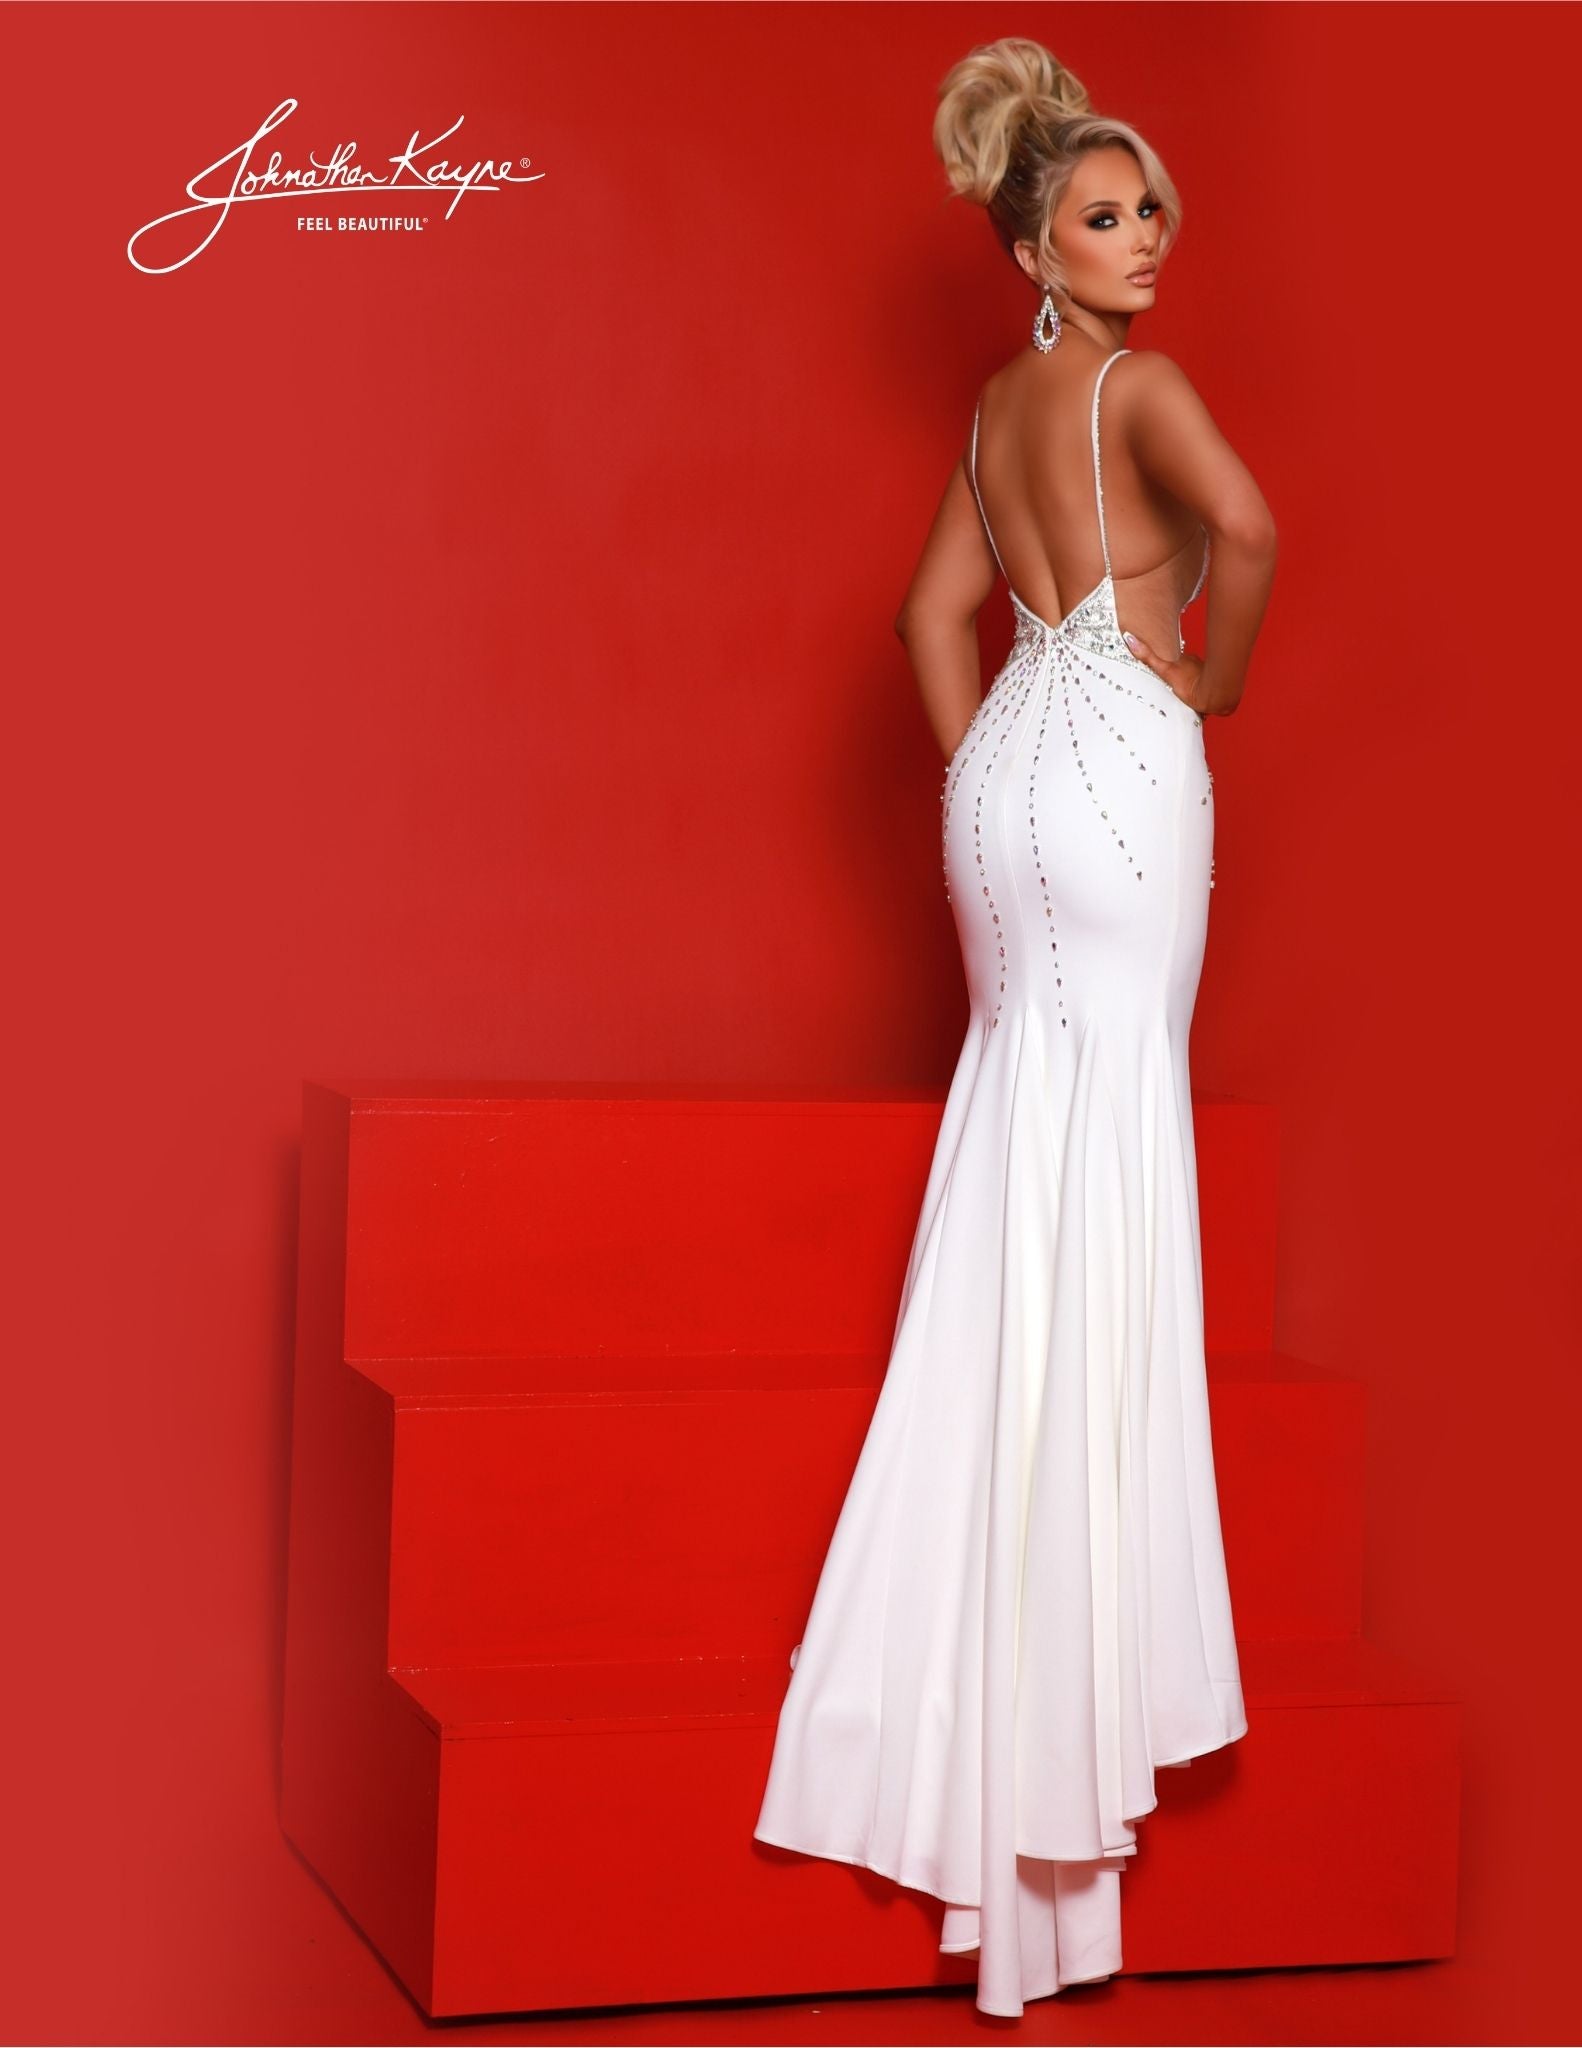 The breathtaking Johnathan Kayne 2881 Long Prom Dress dazzles with a fitted V- neckline, cut out, slit,  train, and formal pageant gown. The sleek silhouette and chic design make it perfect for a special occasion. Elevate your style and make a lasting impression with this heavy knit gown. Featuring sultry side cutouts, a low V-neckline, and a daring thigh-high slit, this dress is designed to capture attention and leave onlookers in awe.